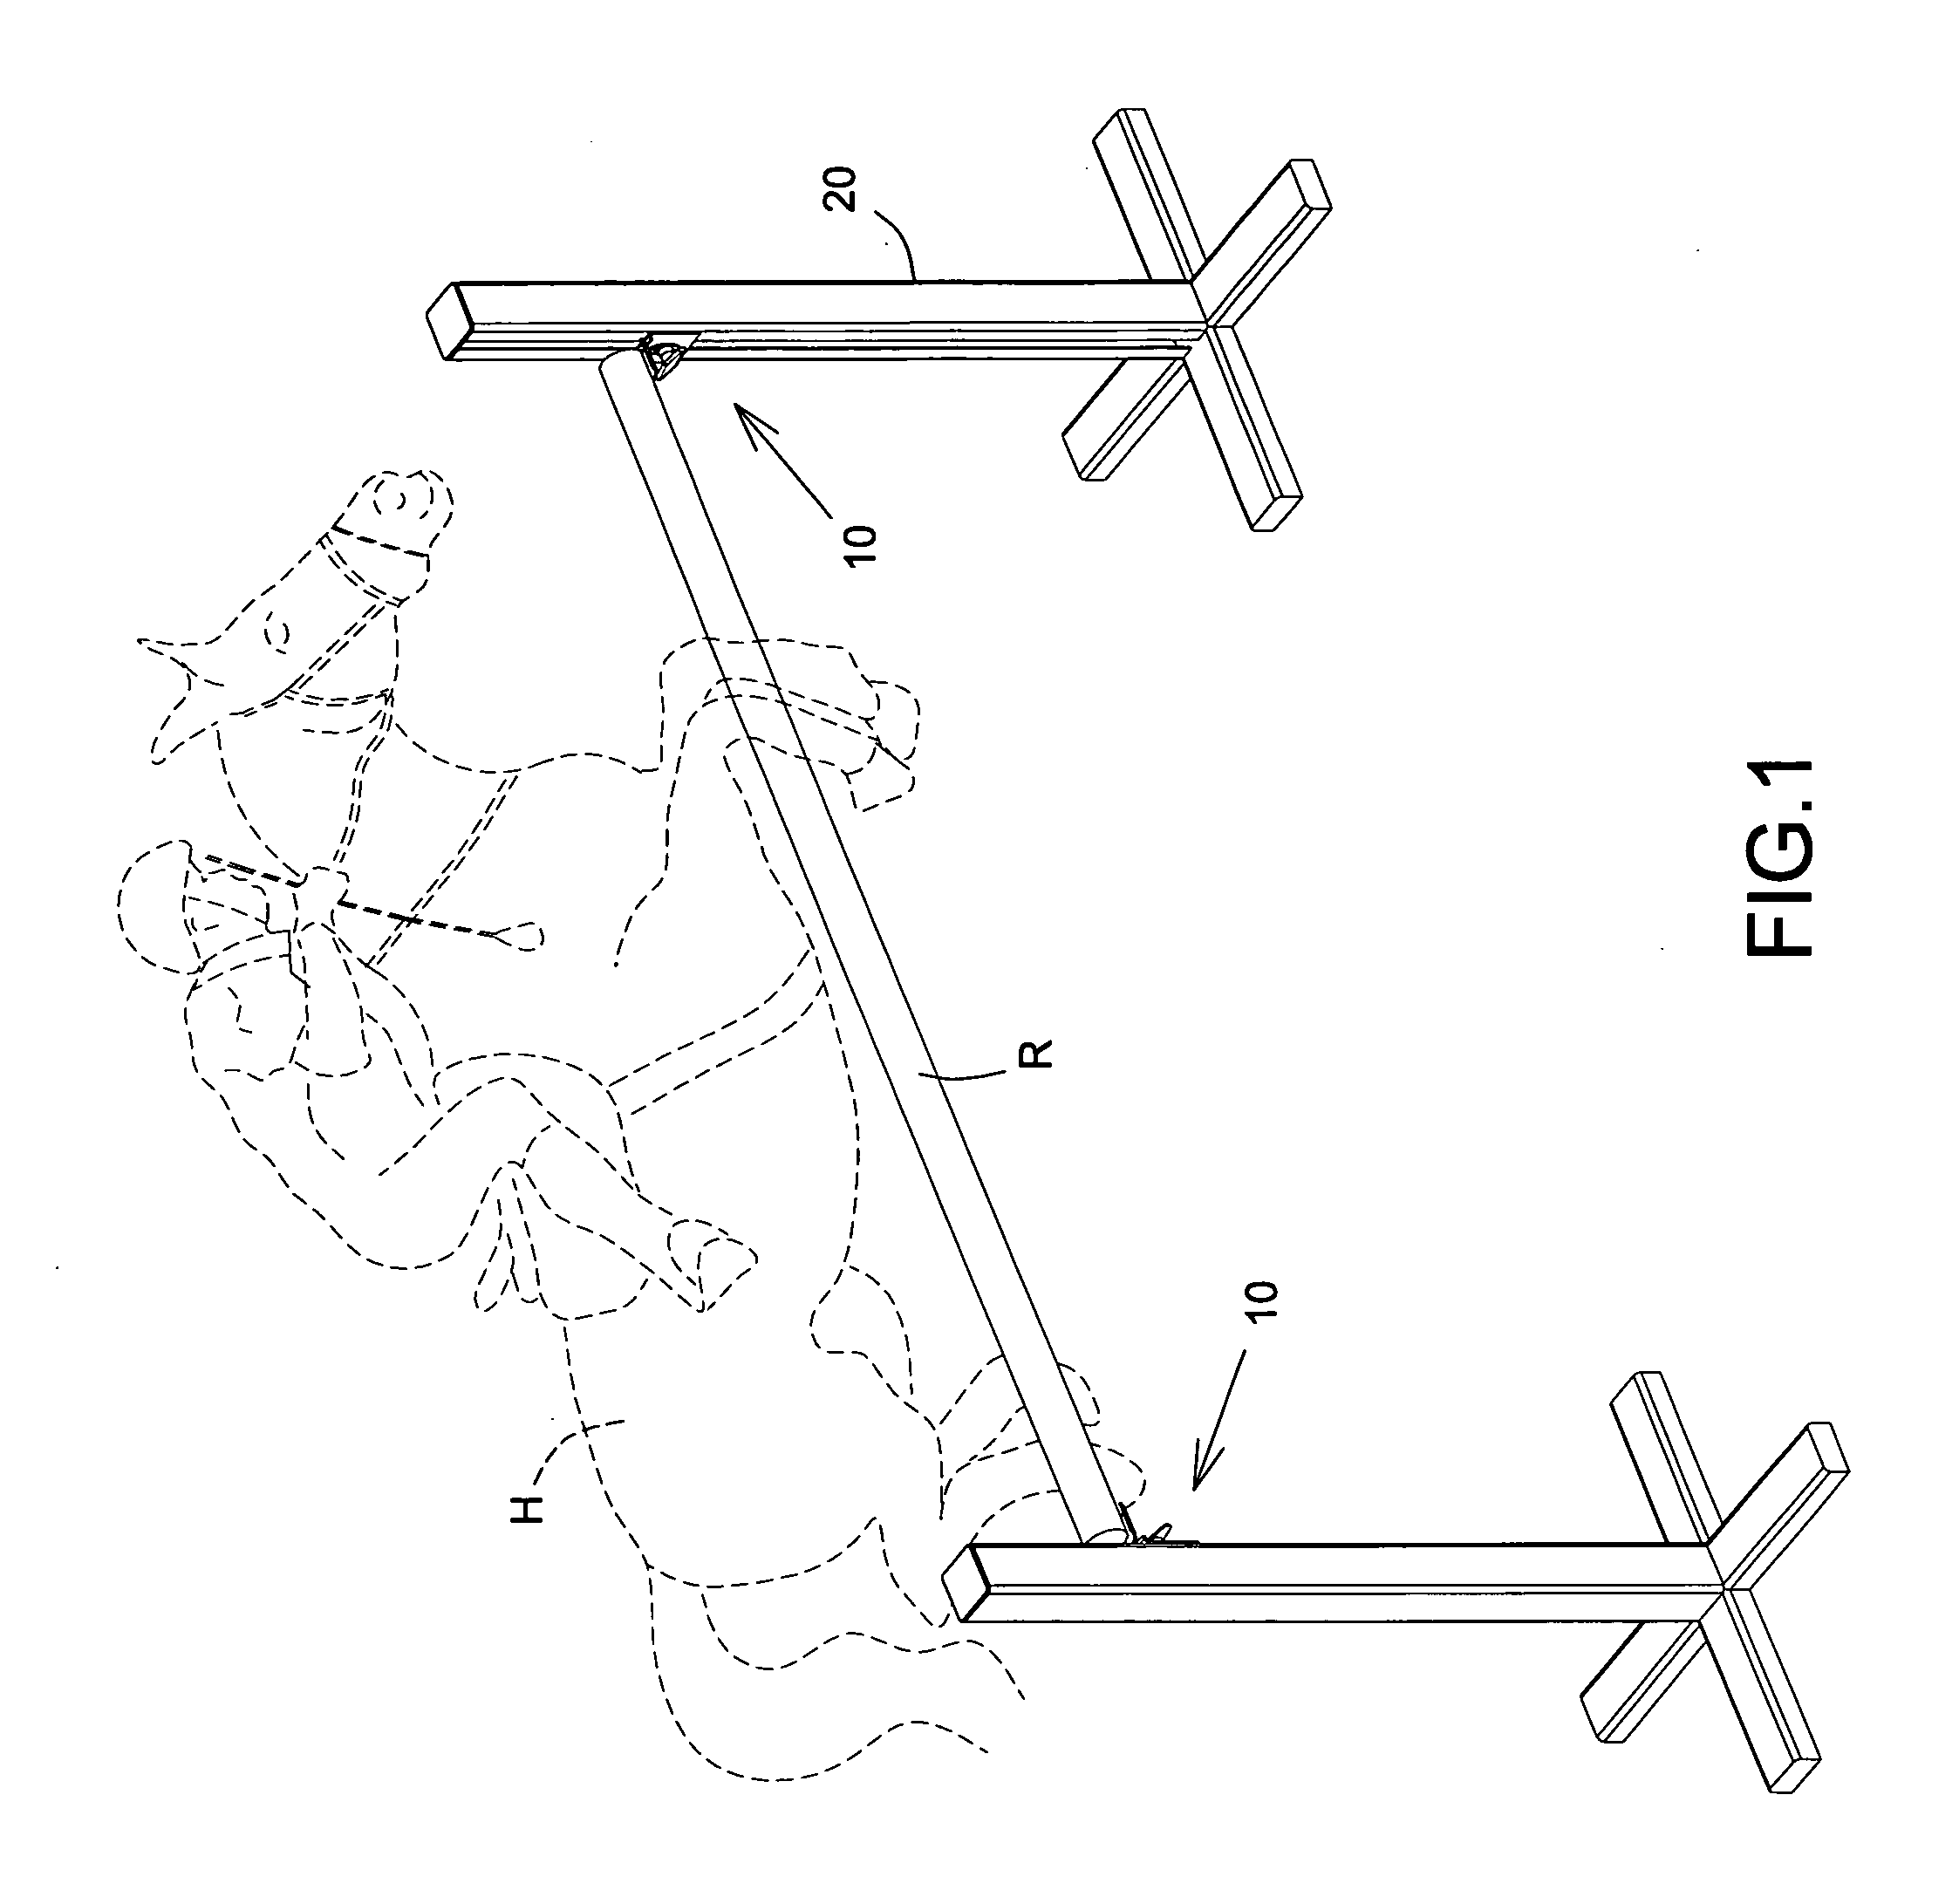 Continuously height-adjustable jump cup attachment bracket and safety feature mechanism